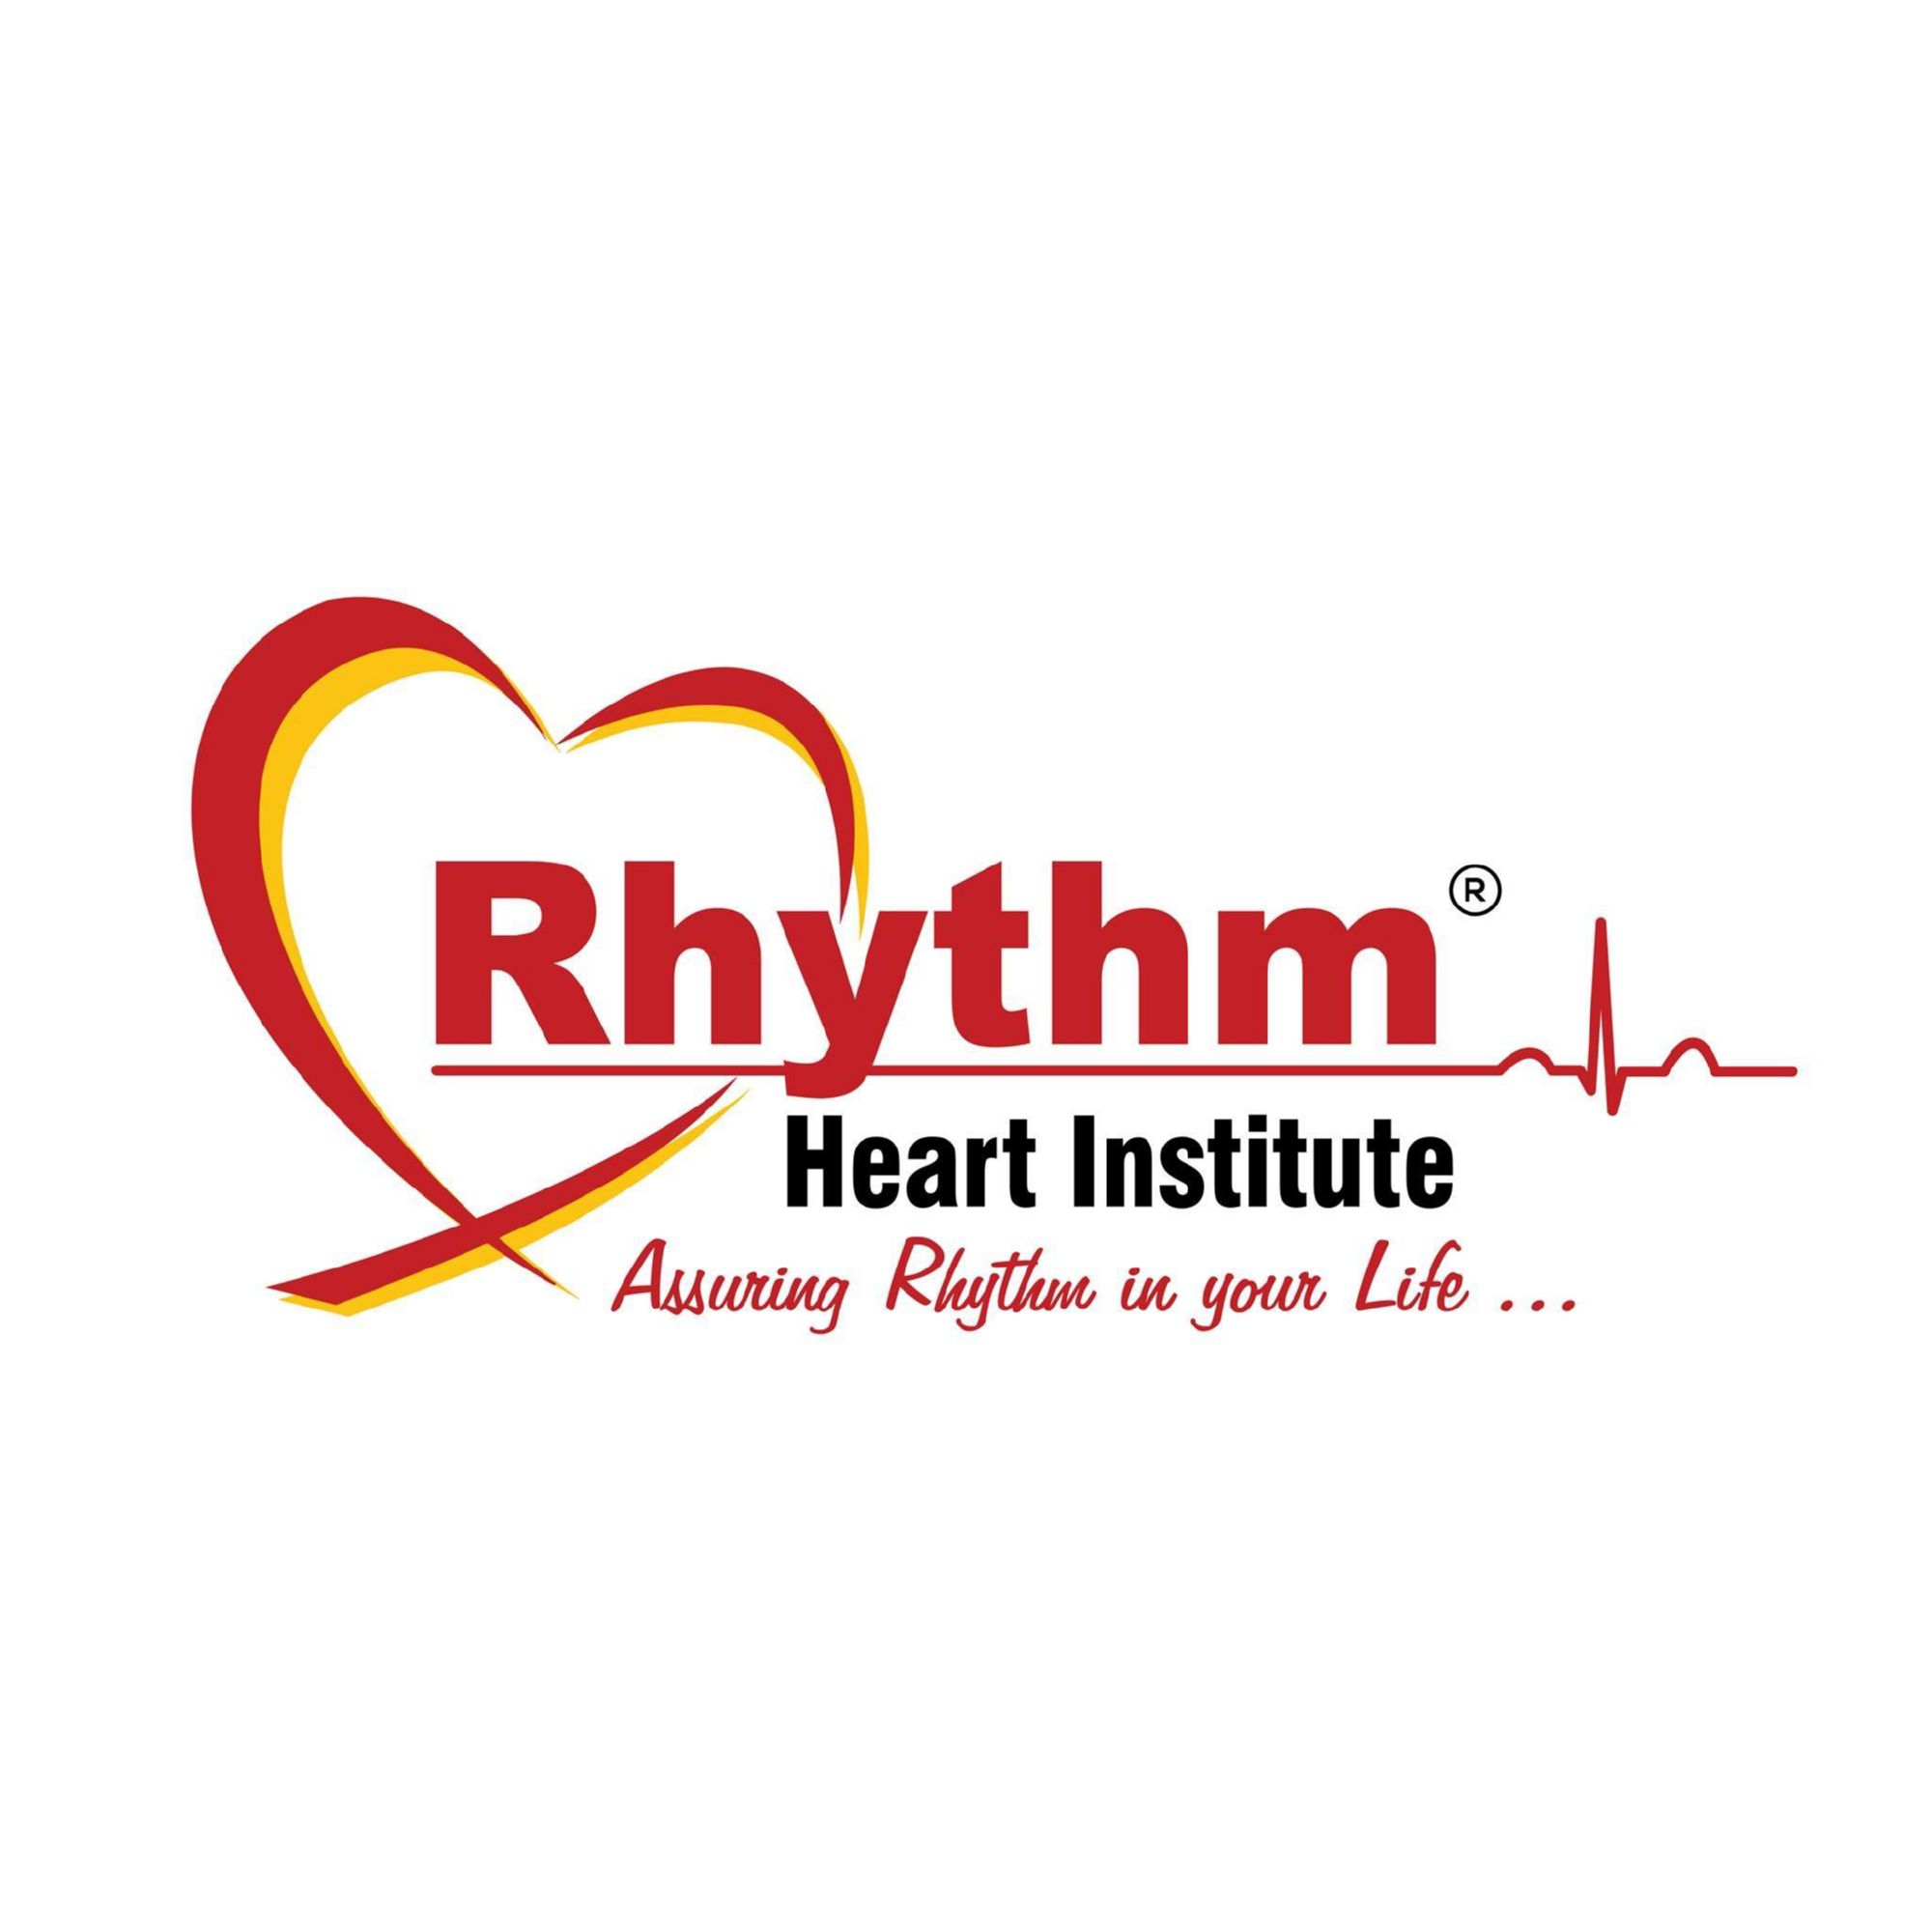 Rhythm Heart Institute|Veterinary|Medical Services